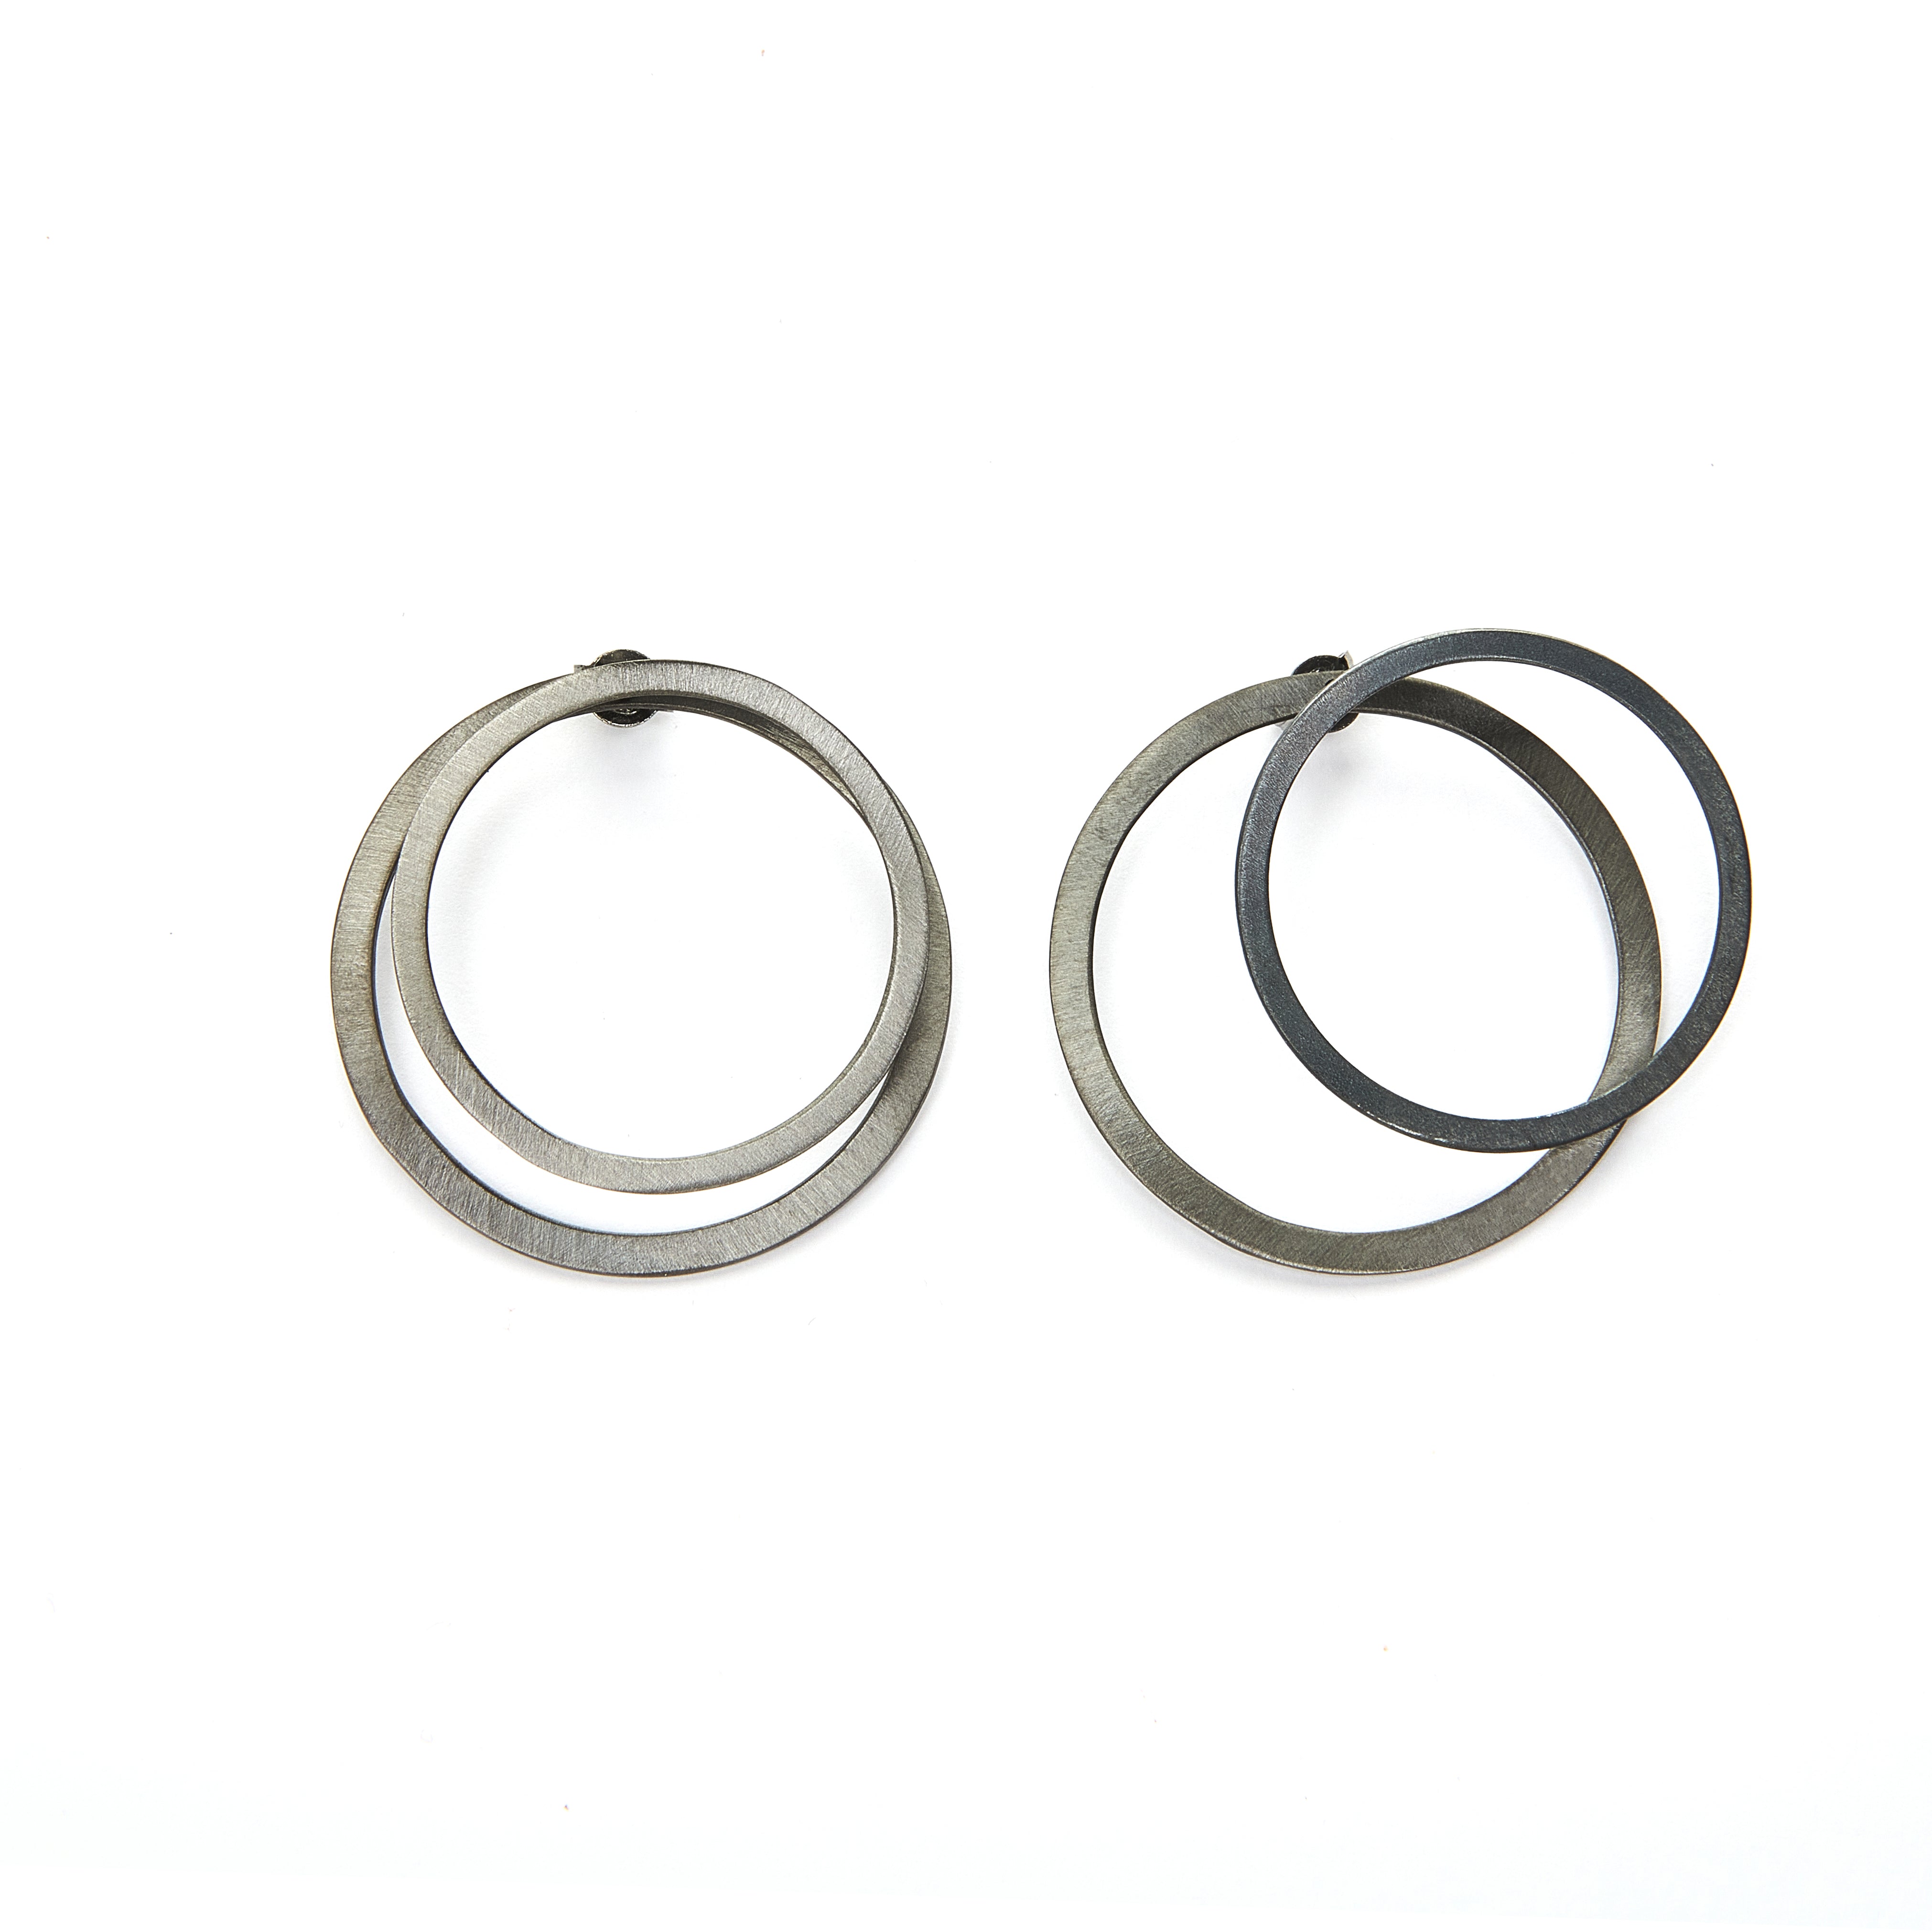 Circle ear jacket earrings in silver 925 or brass, gold-plated or platinum-plated that can be worn in more than one configuration. Wear both front and back geometric earrings in the front of the ear for a classy statement, just the front stud earrings for a minimal look, or add the back earrings for a special and unique look